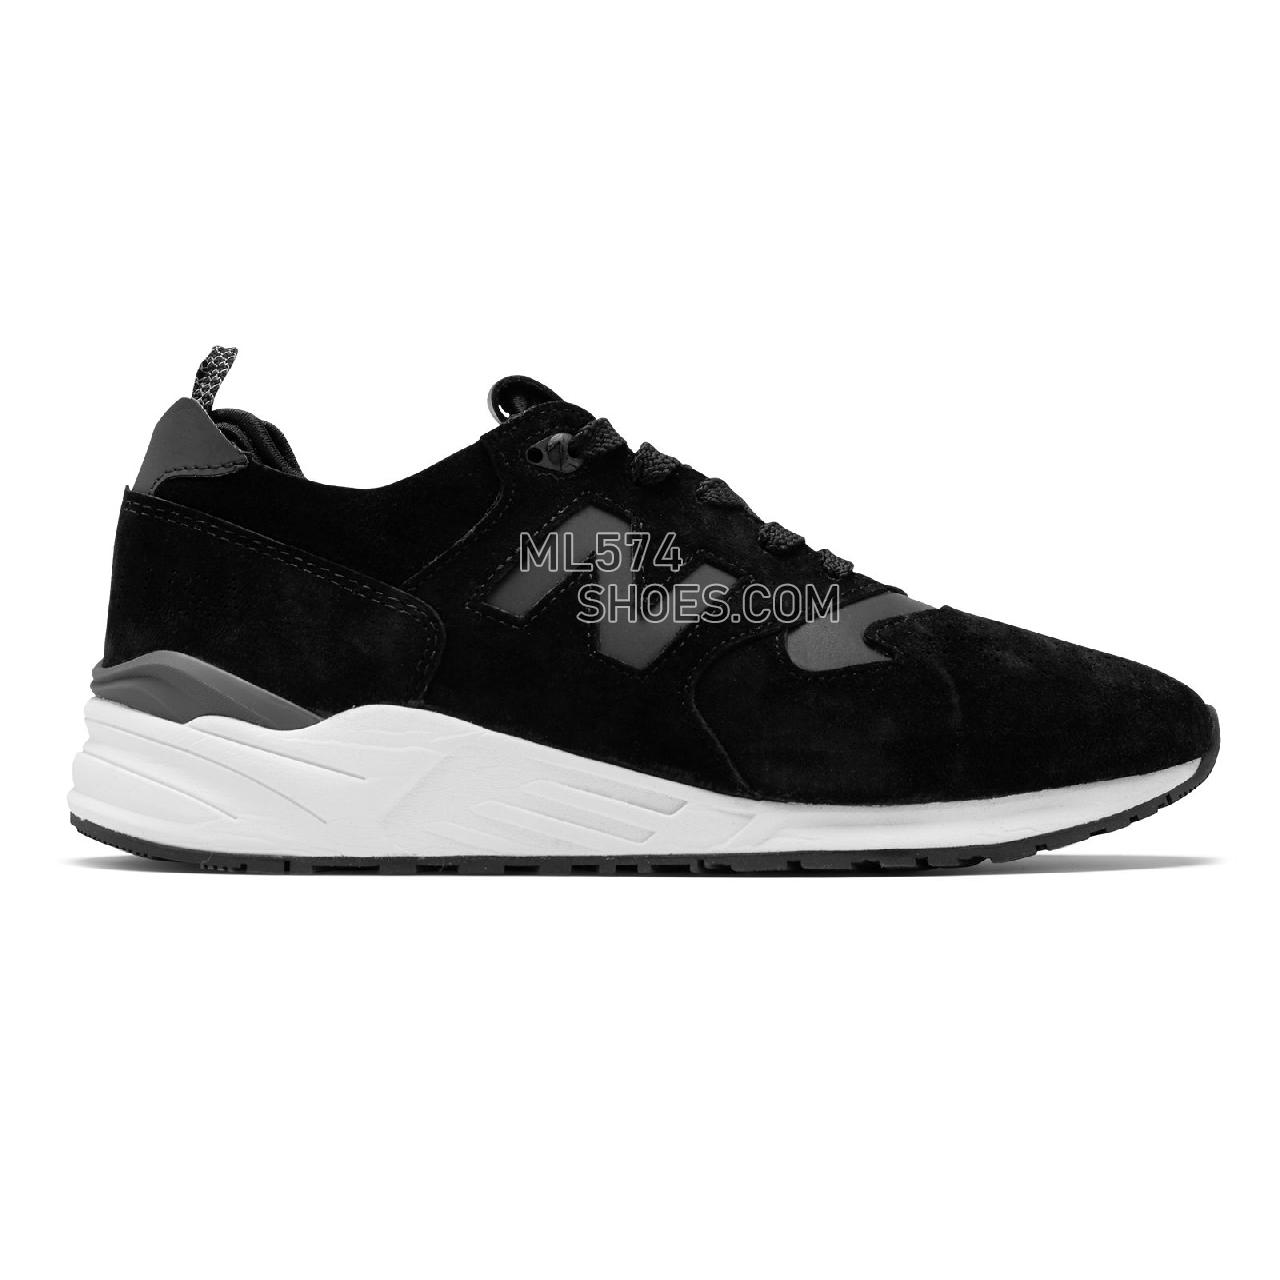 New Balance 999 Made in US - Men's 999 - Classic Black with White - M999RTF